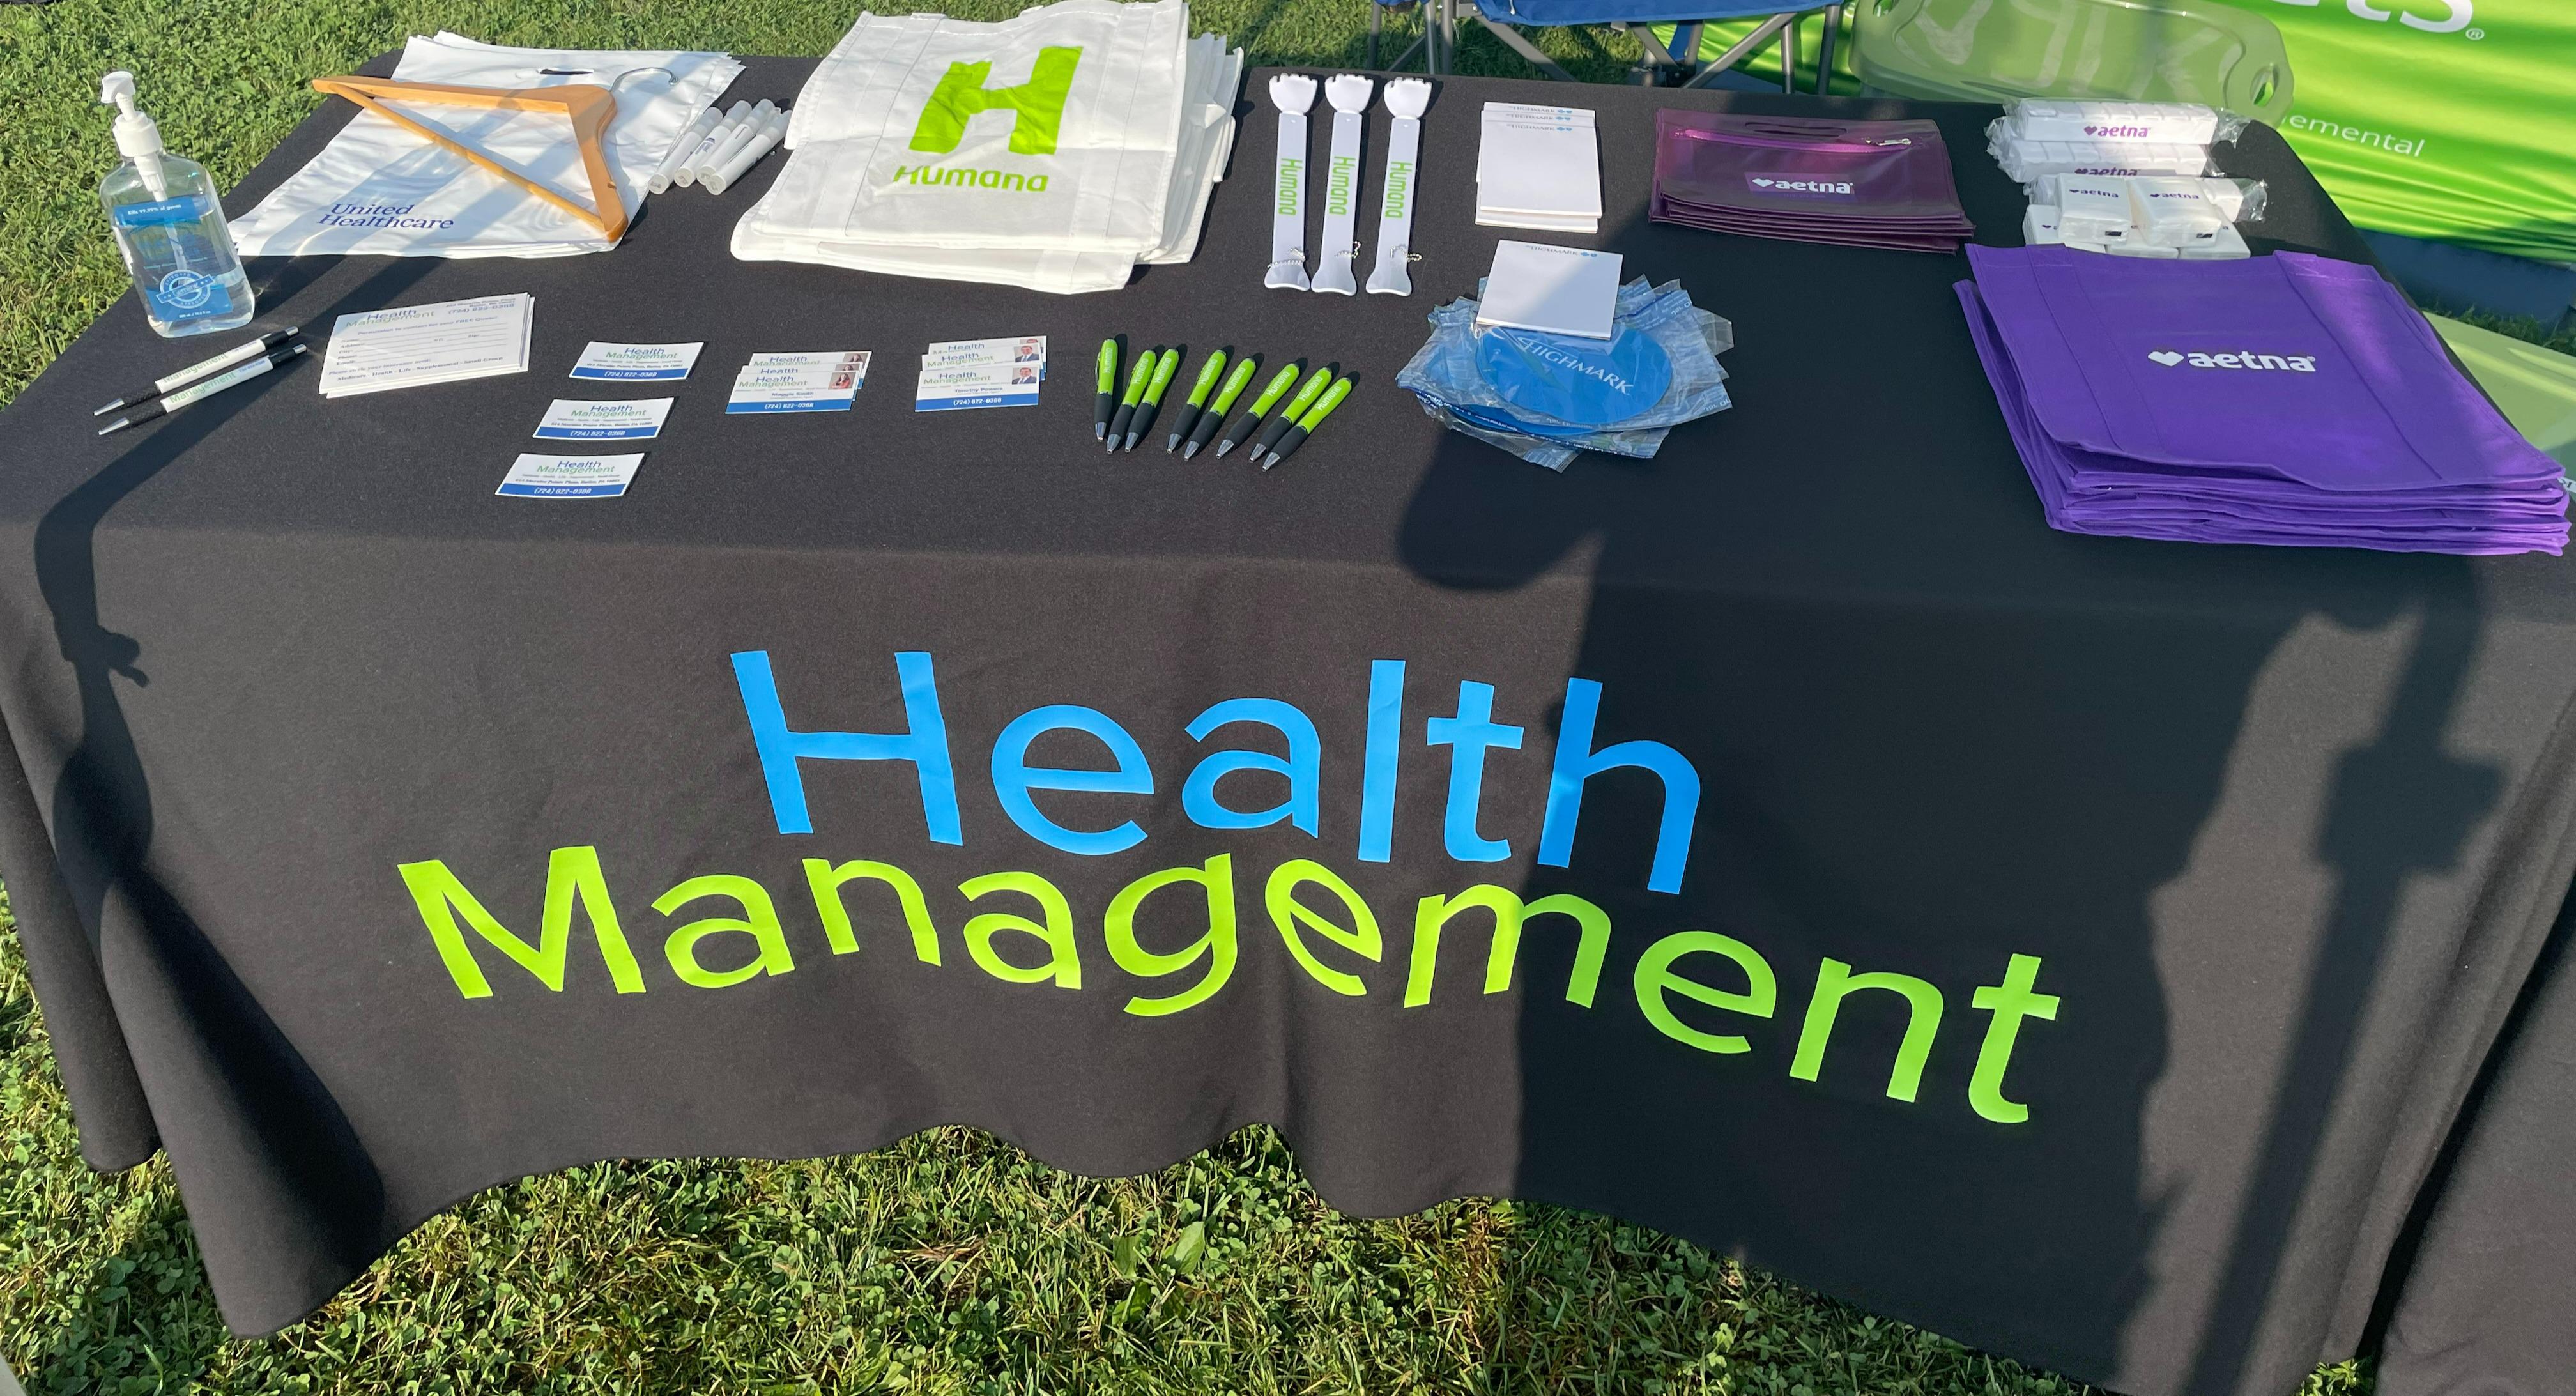 Health Management at Strawberry Days in Grove City PA. Providing information to the community and some nice handout items as well.